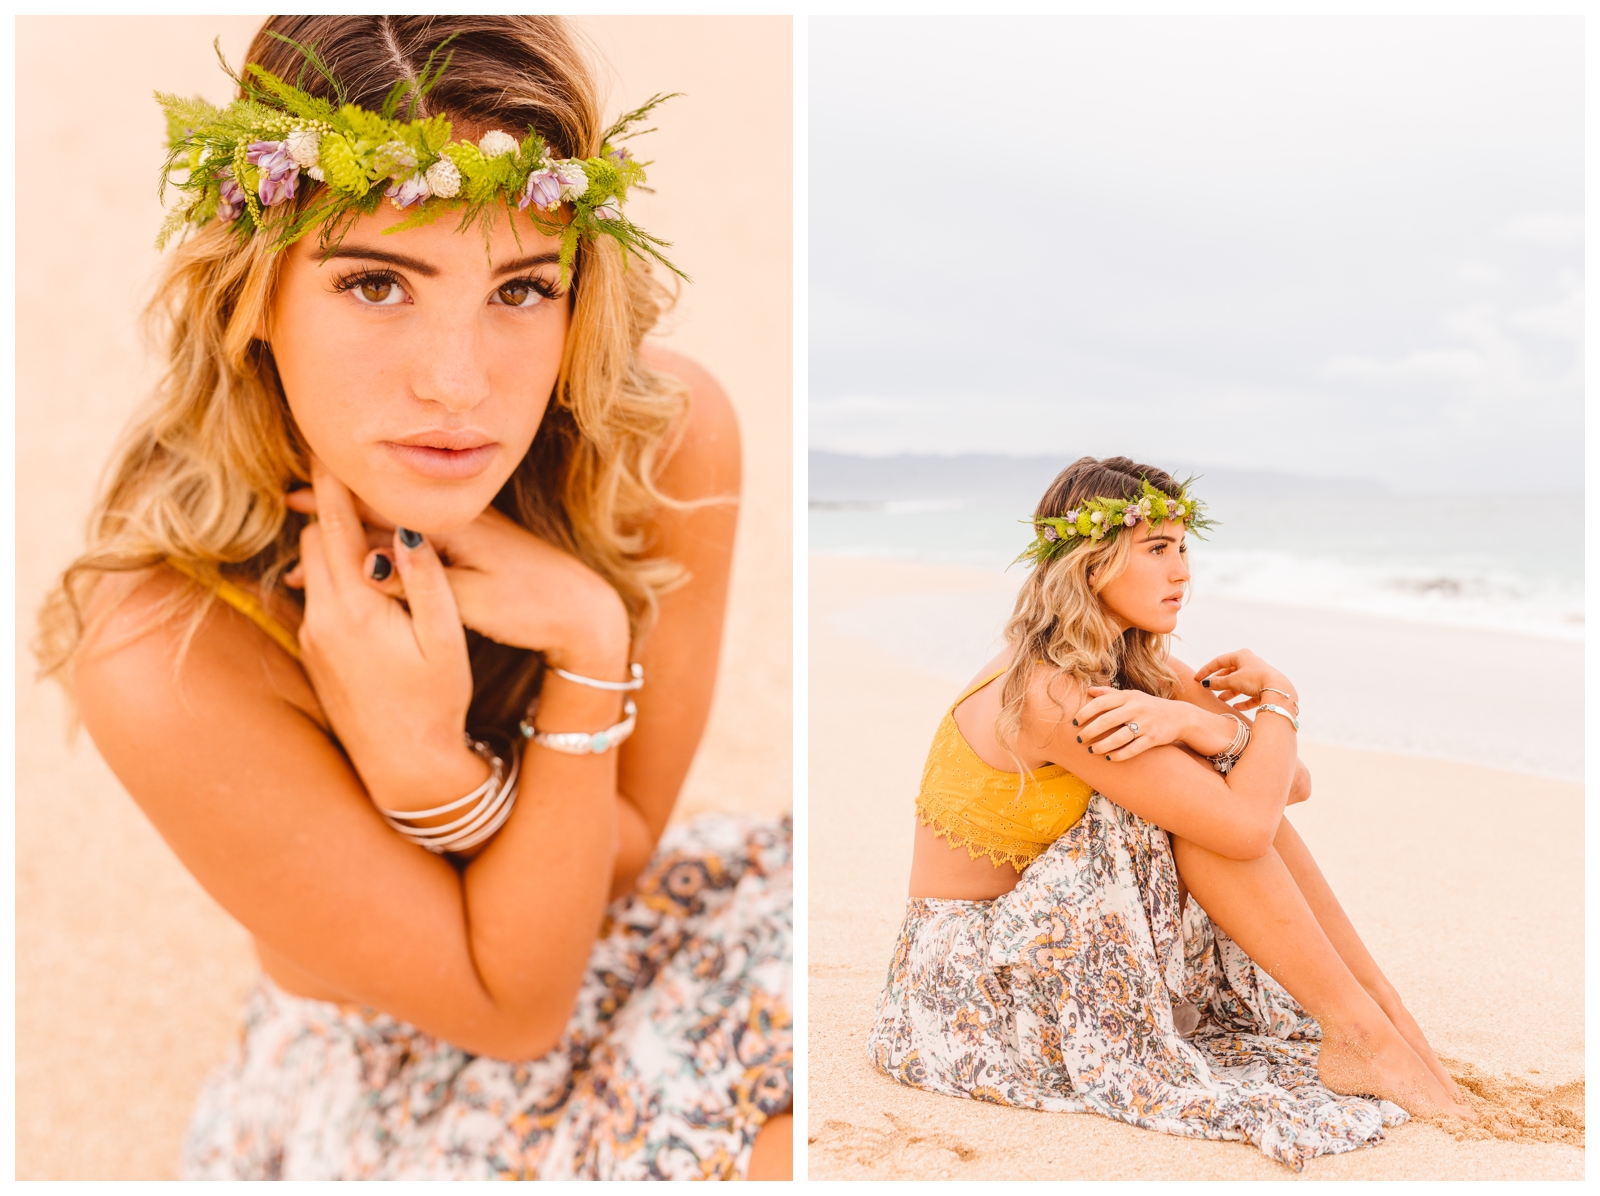 Bright Bohemian Inspired Beach Portrait Session - Oahu Hawaii - Brooke Michelle Photography